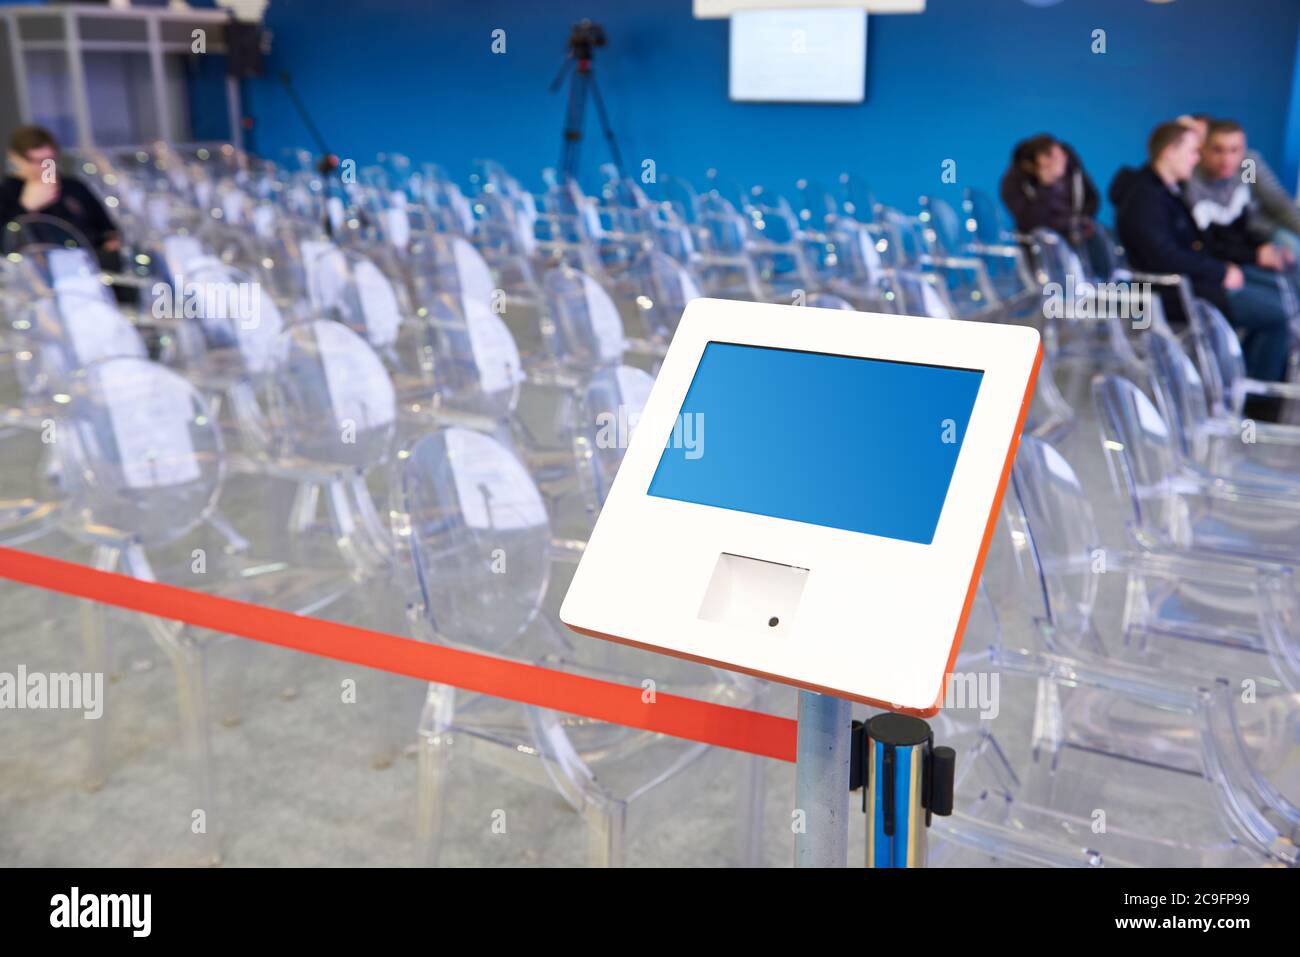 Electronic device for registering visitors to the conference Stock Photo